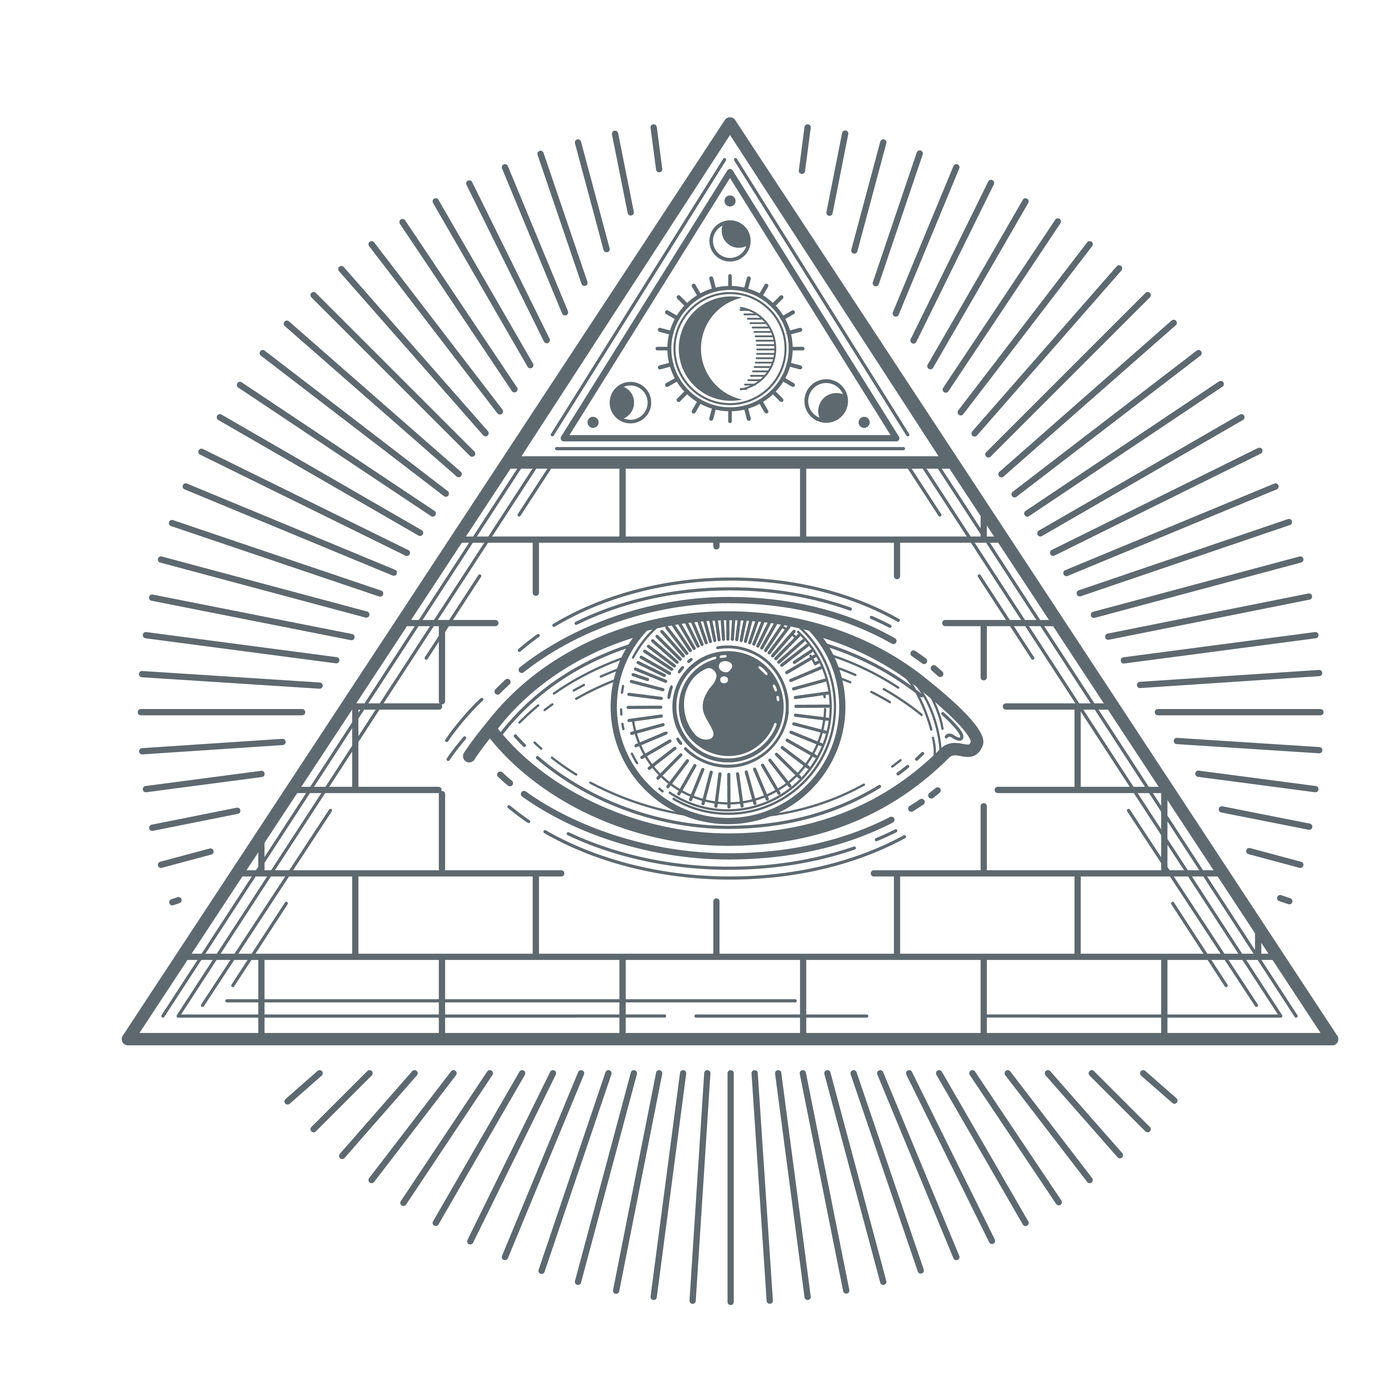 Mystical occult sign with freemasonry eye symbol vector illustration By